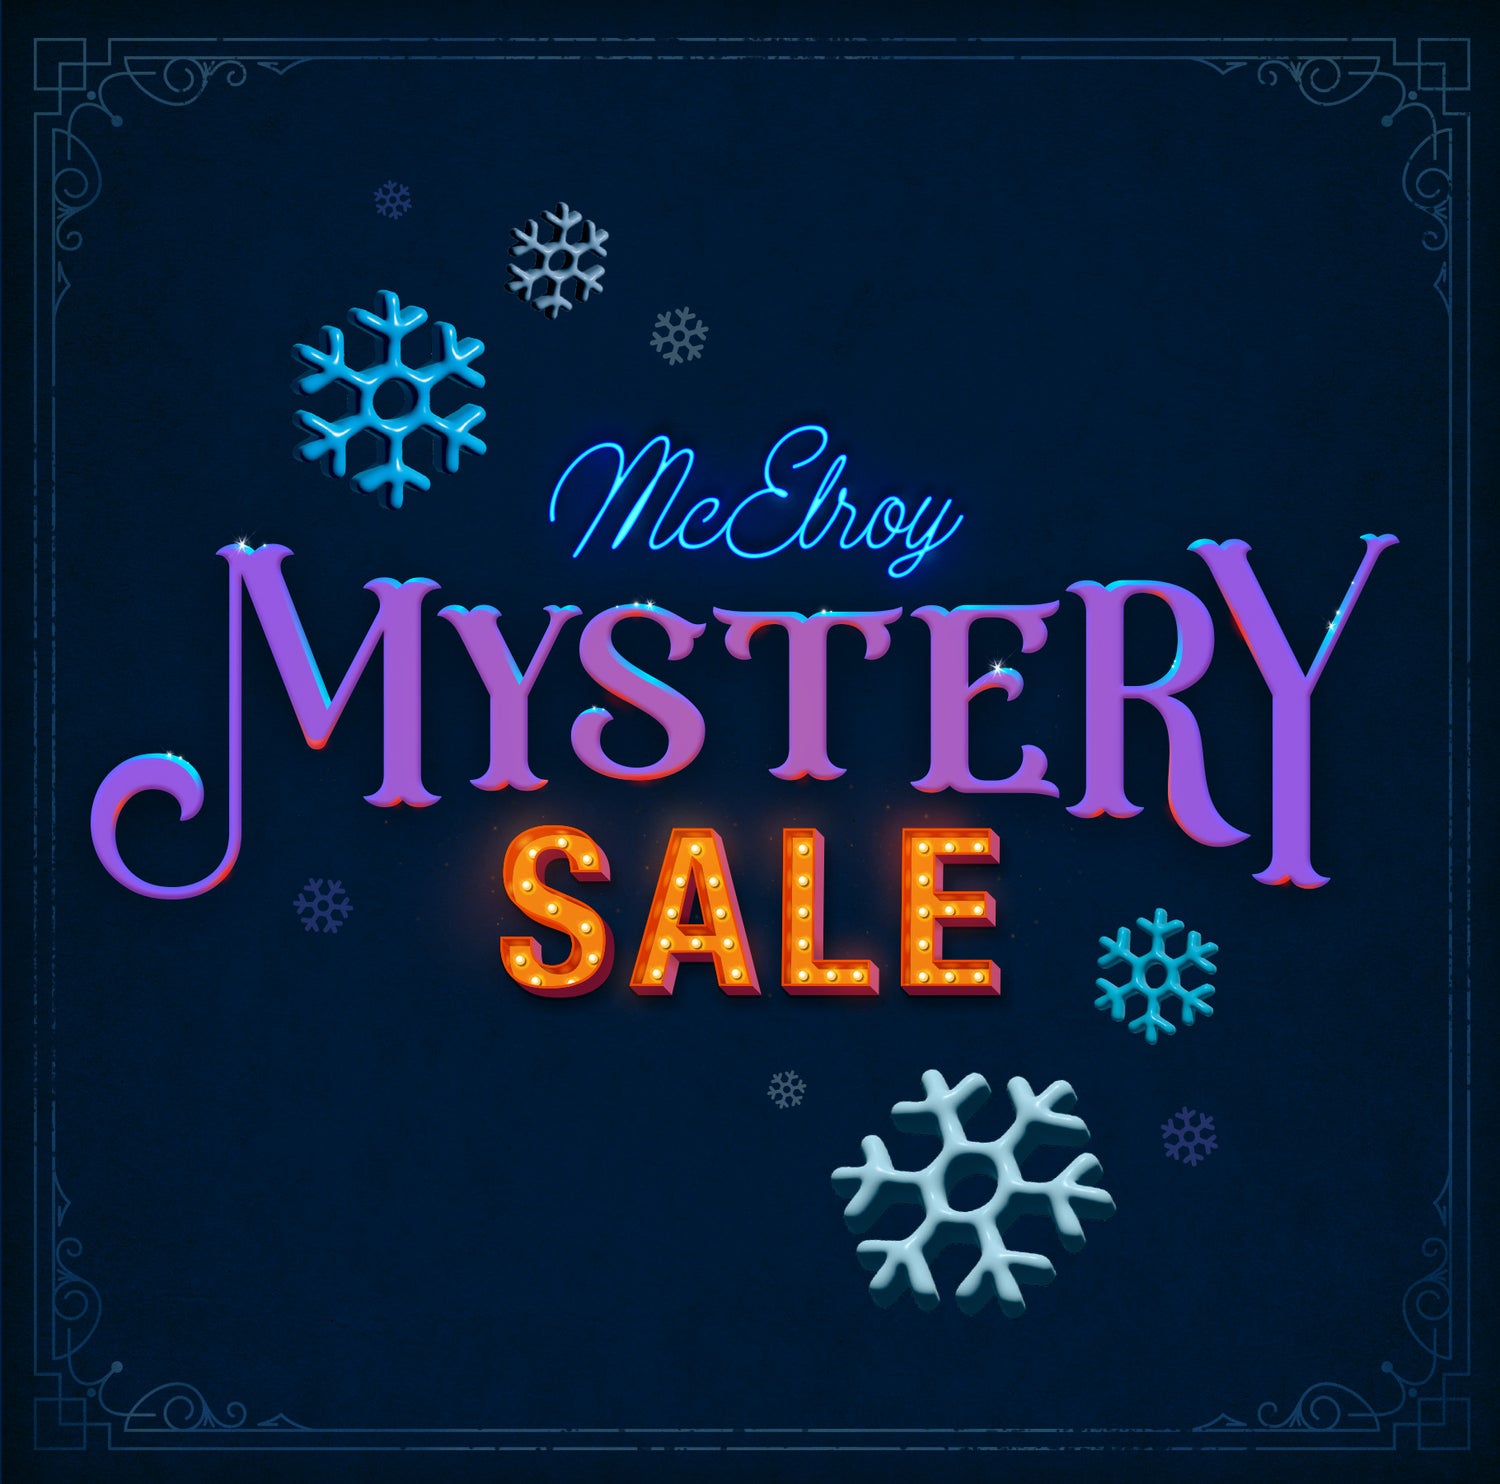 A deep blue field with an ornate frame with blue, purple an orange text inside that reads "McElroy Mystery Sale". Text is surrounded by blue three dimensional snowflakes.